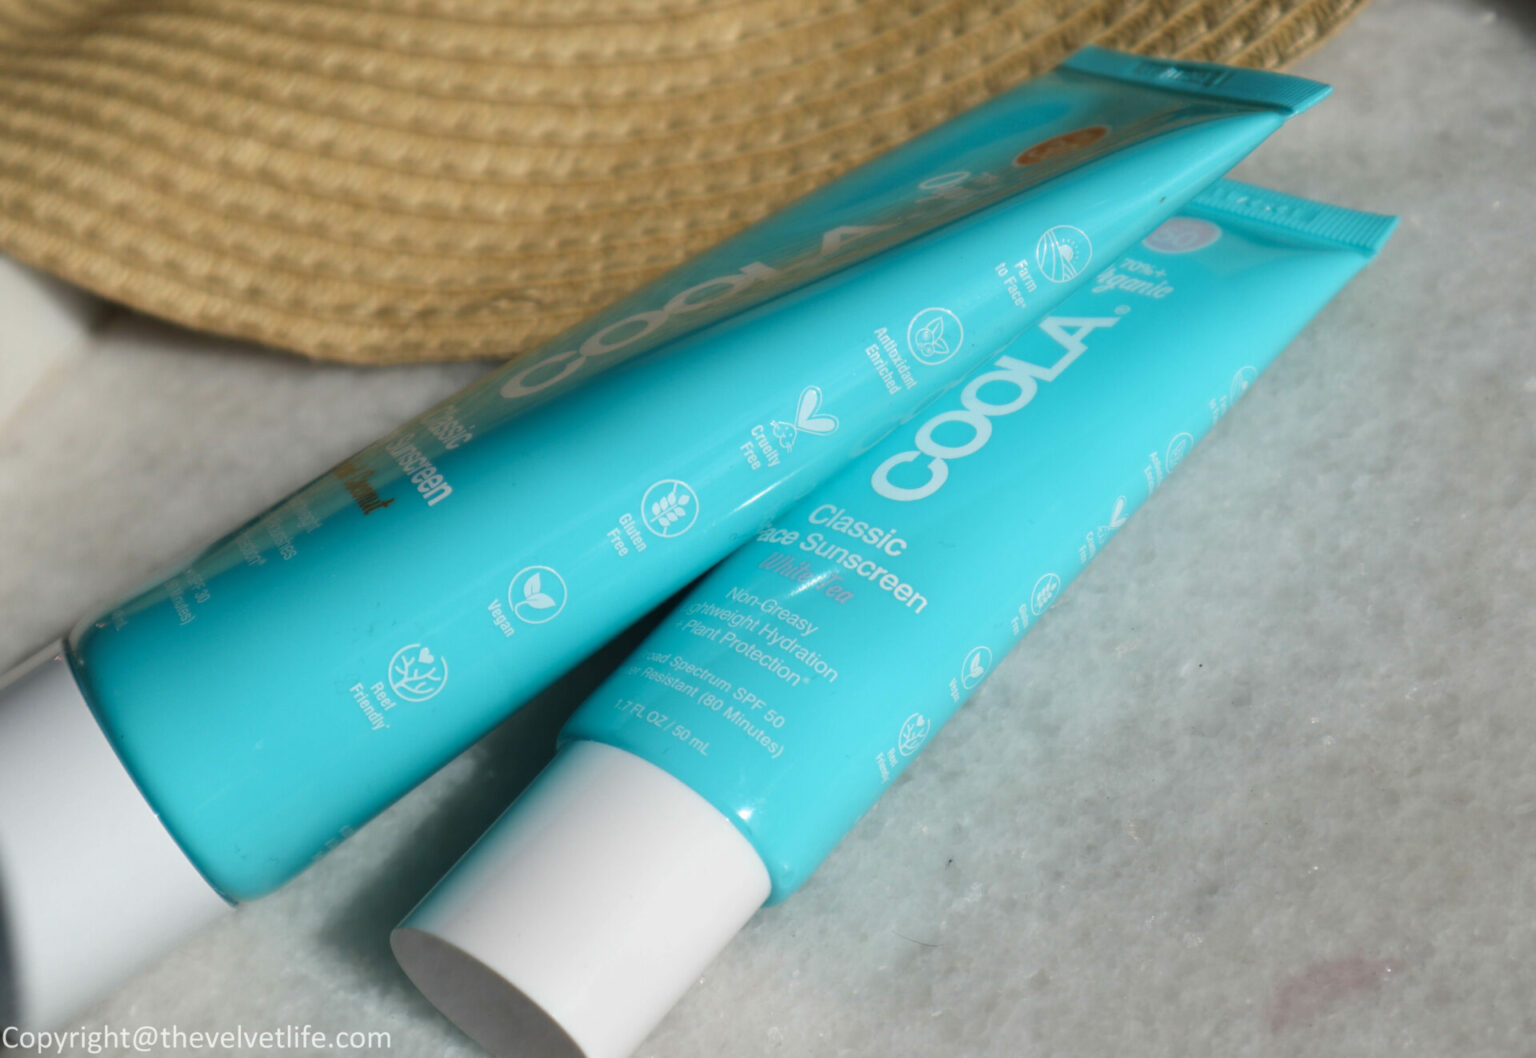 does coola sunscreen work